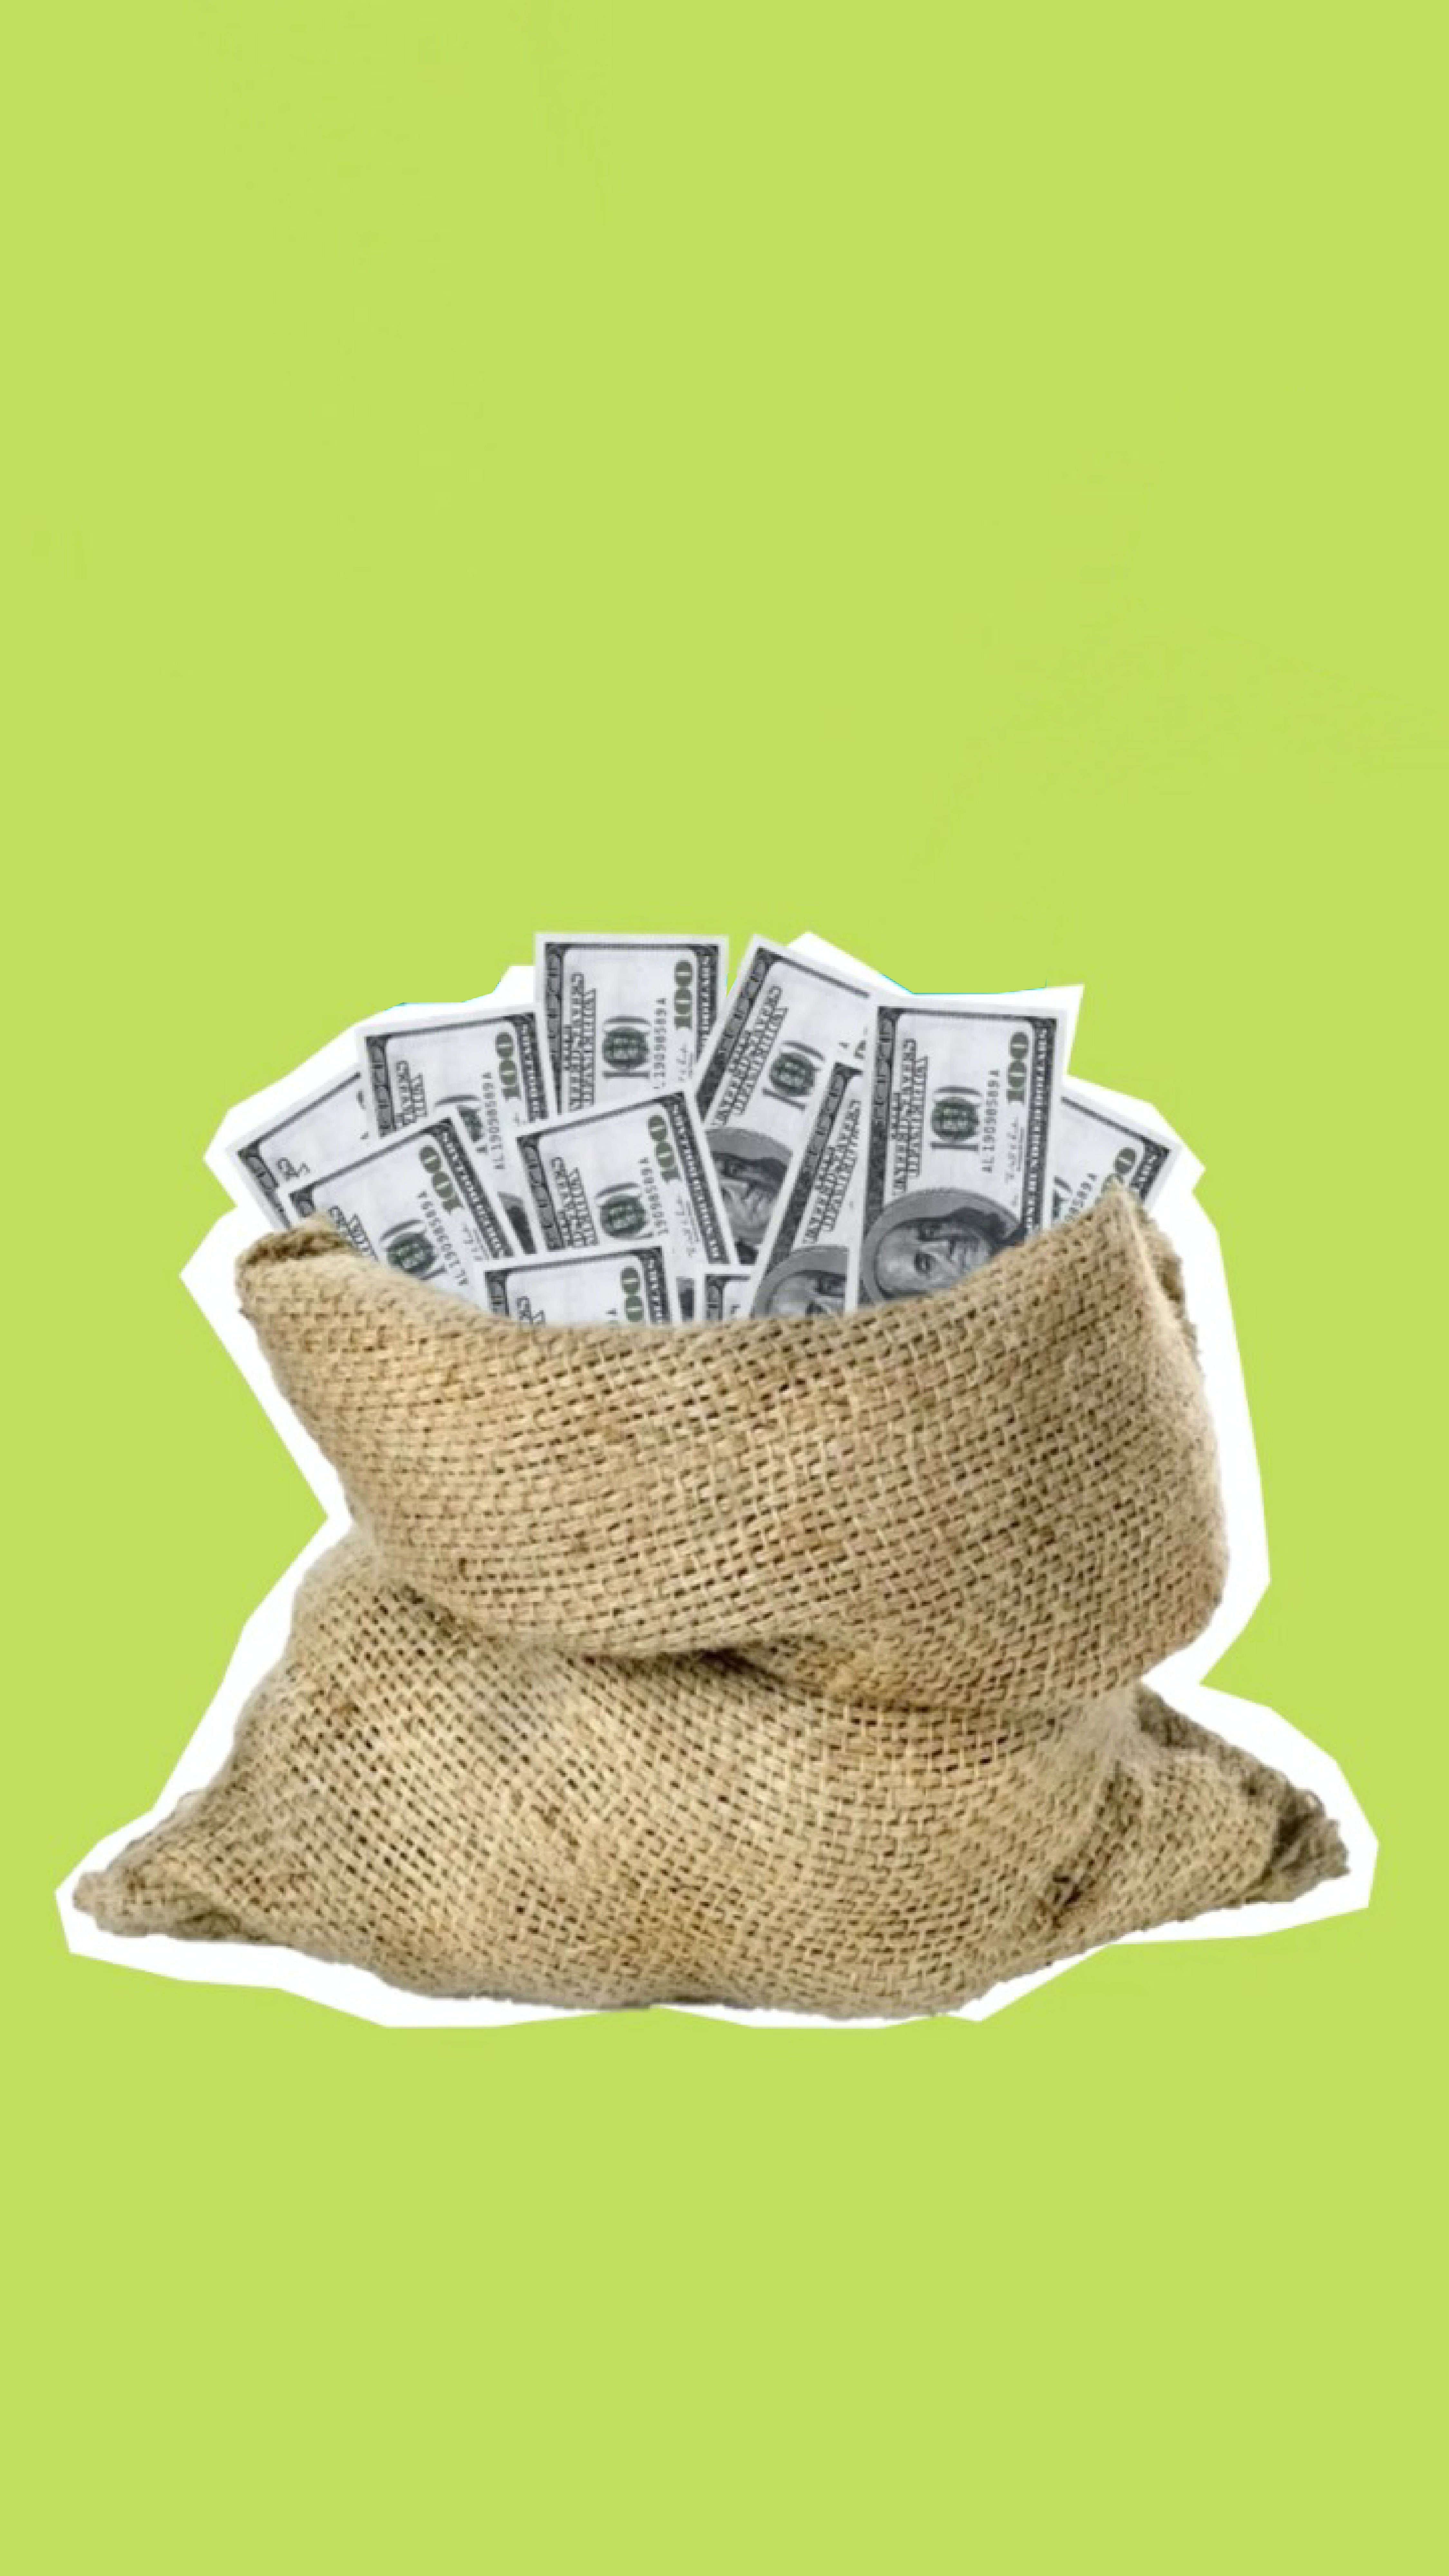 A bag full of money on a green background - Money